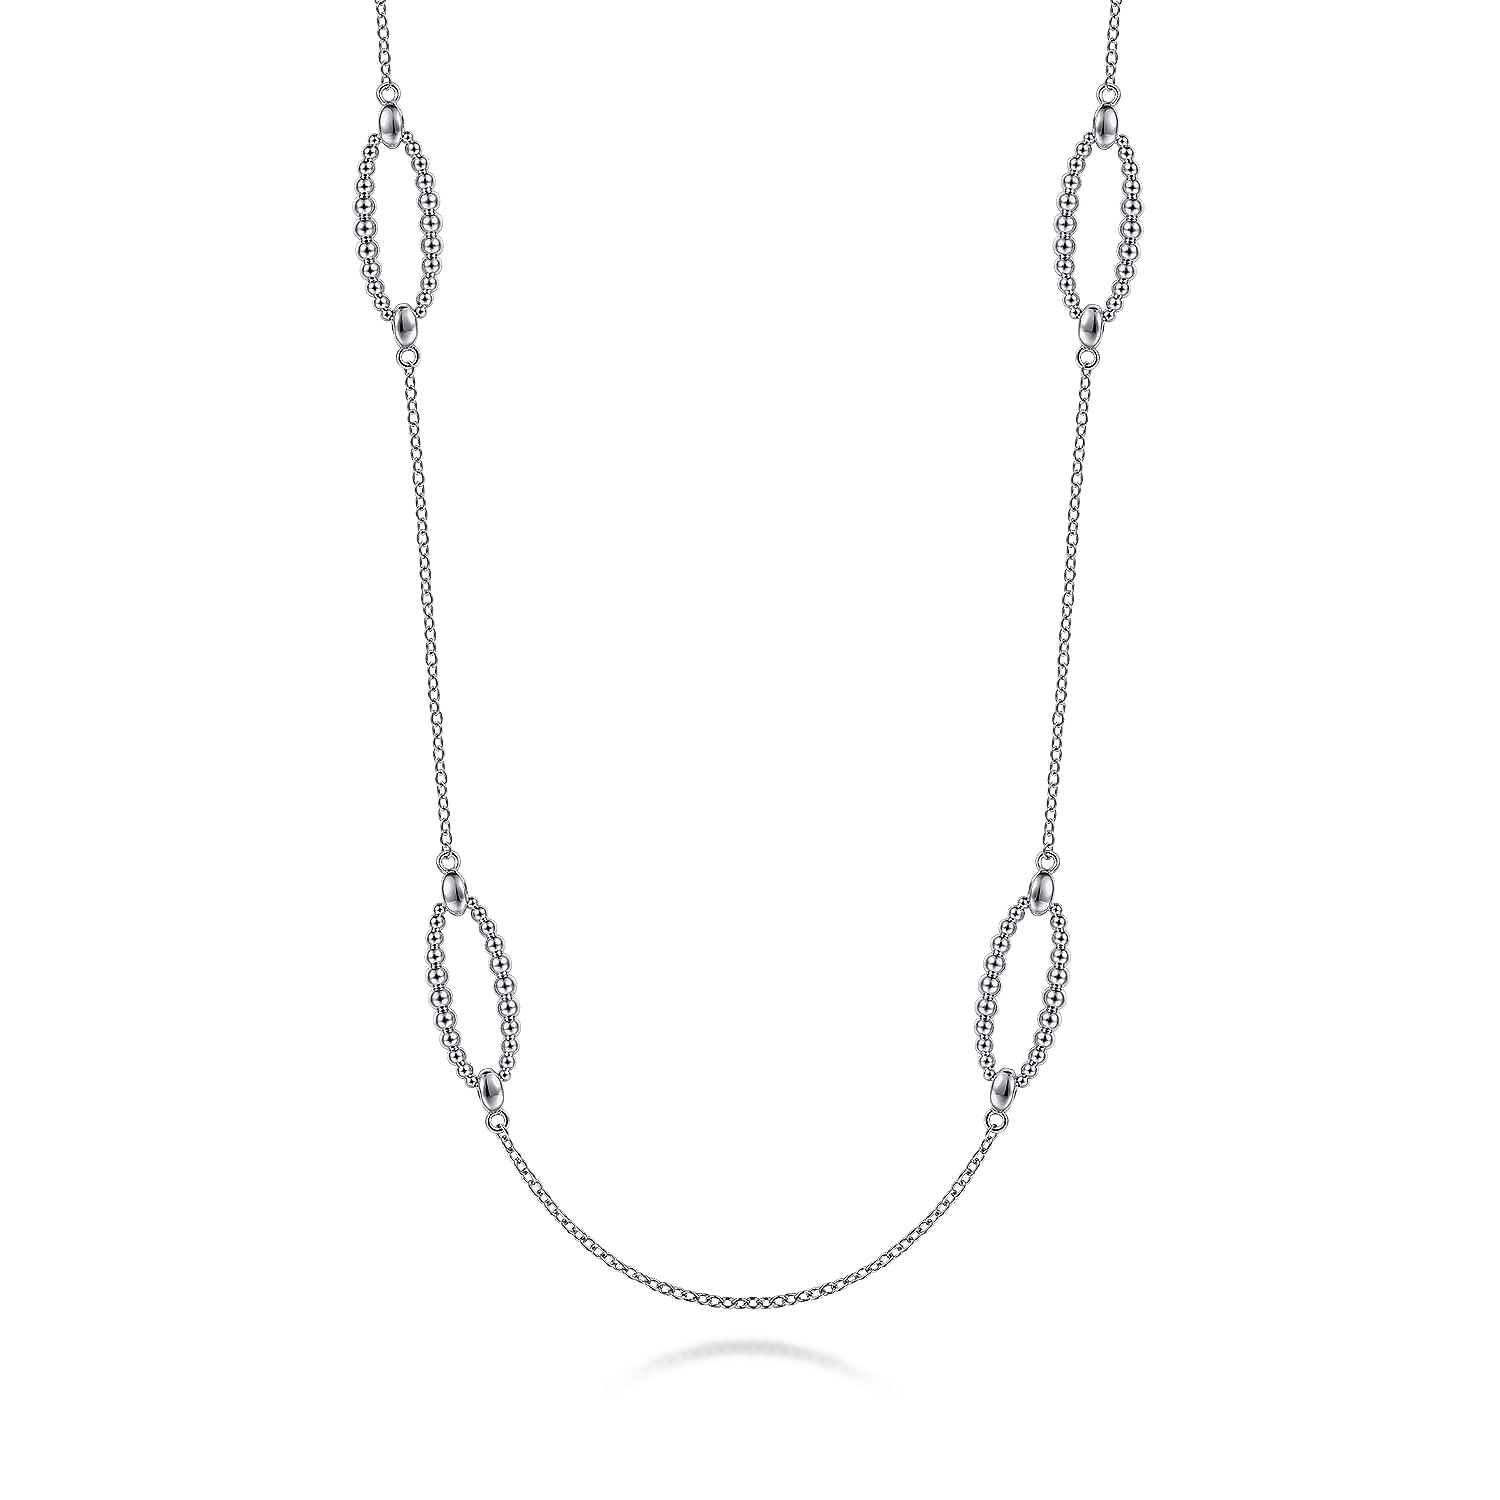 32 inch 925 Sterling Silver Station Bujukan Necklace